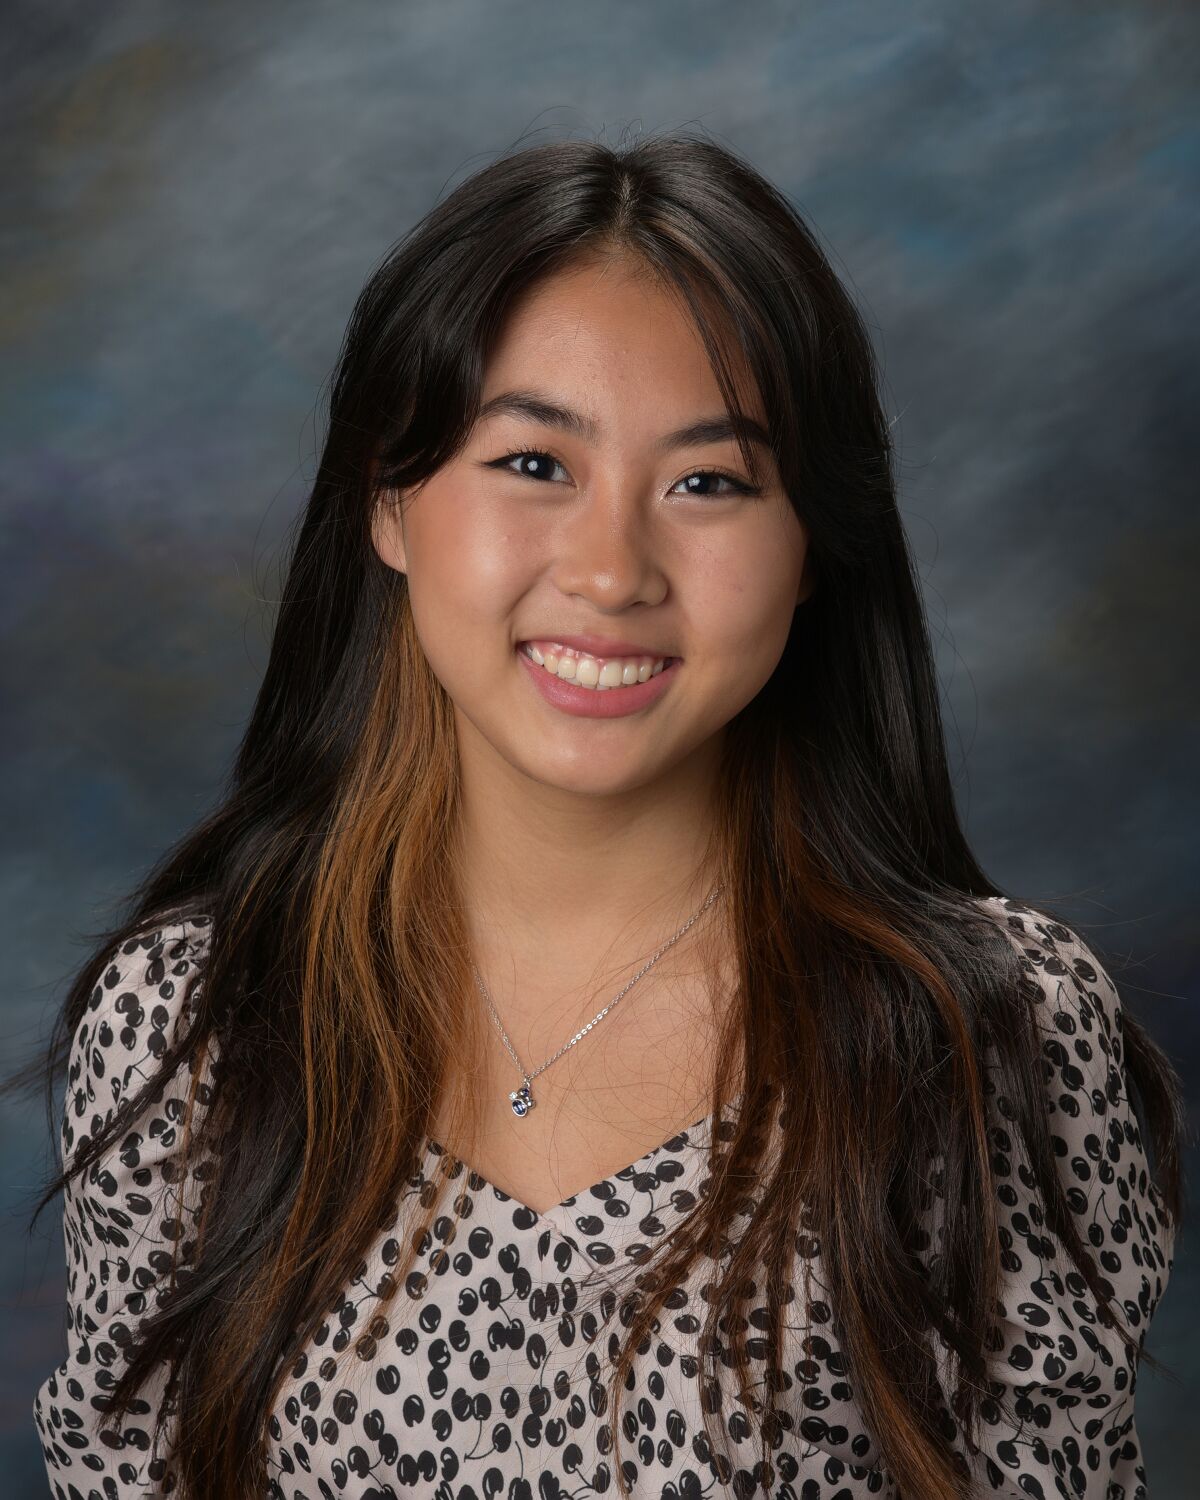 La Jolla Country Day School sophomore Victoria Huang won several awards in this year's Scholastic Art & Writing contest.